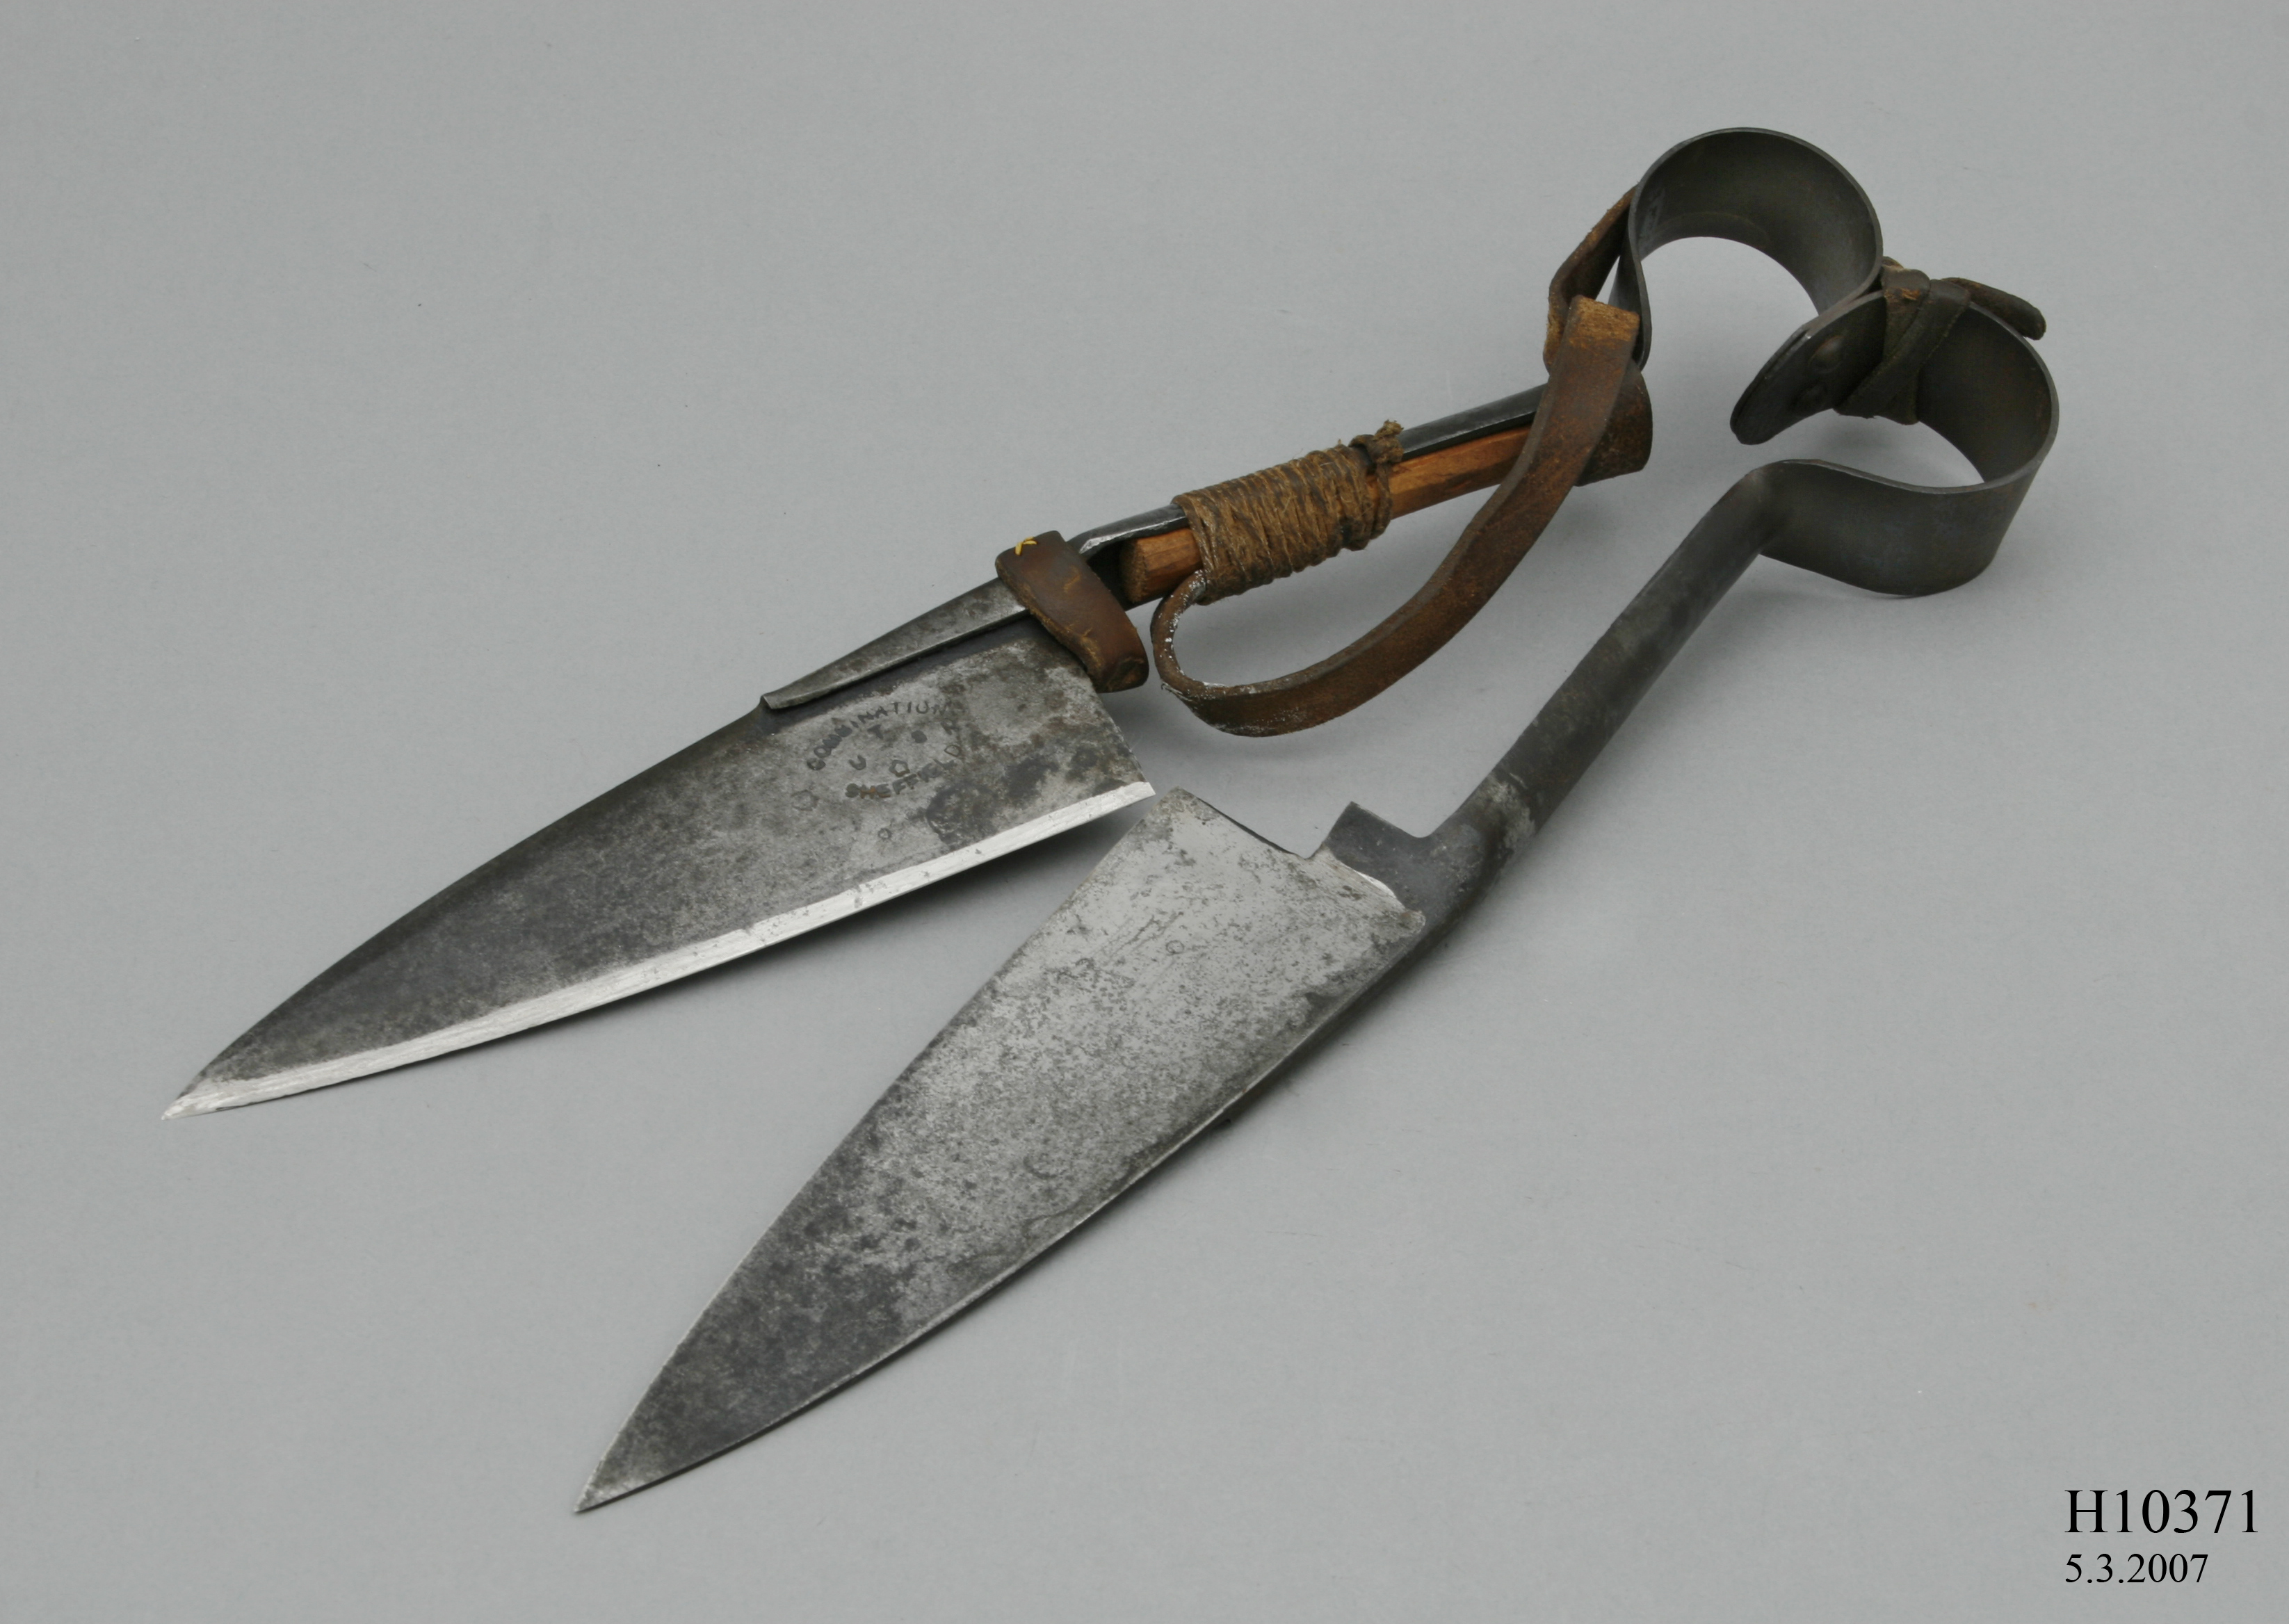 Sheep shears made from two sharp blades of metal joined by looped handles. There is also a leather strap attached to the left blade with twine. 